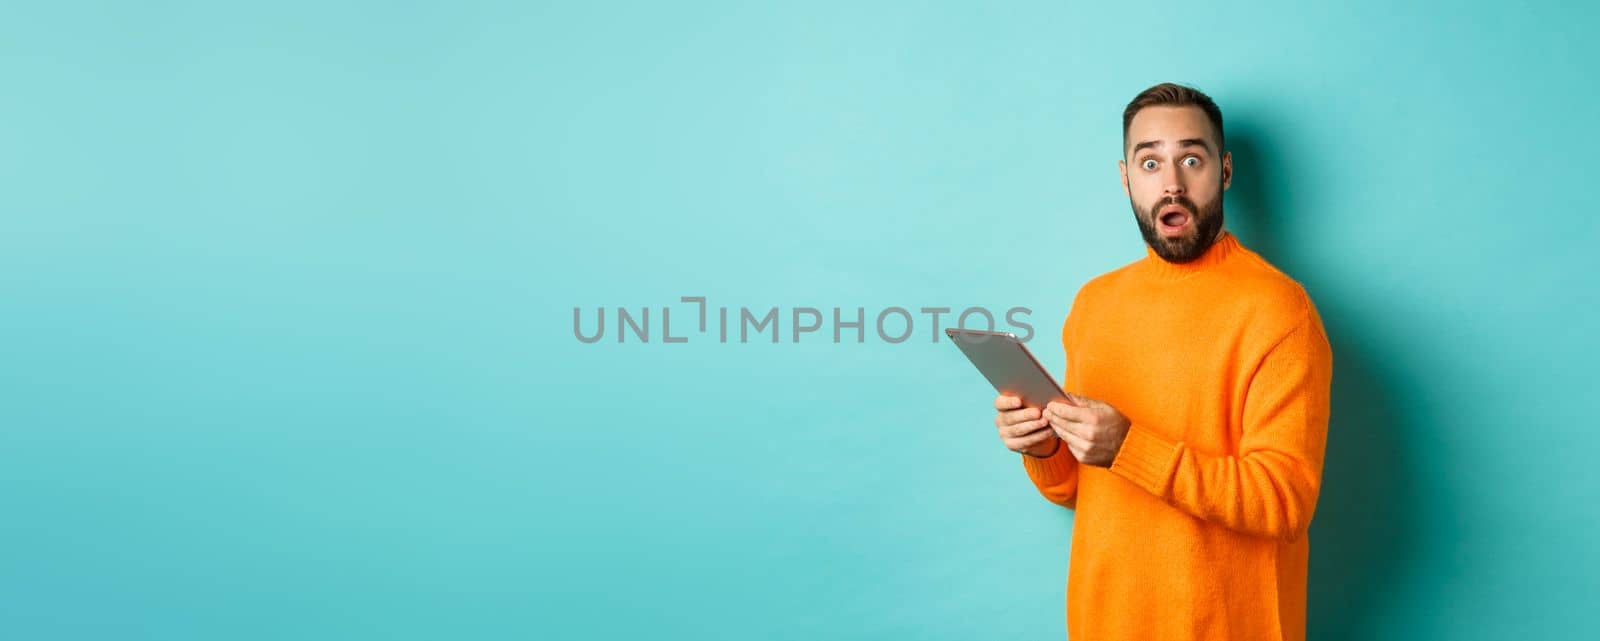 Image of male model in orange sweater using digital tablet, looking surprised, standing over light blue background.